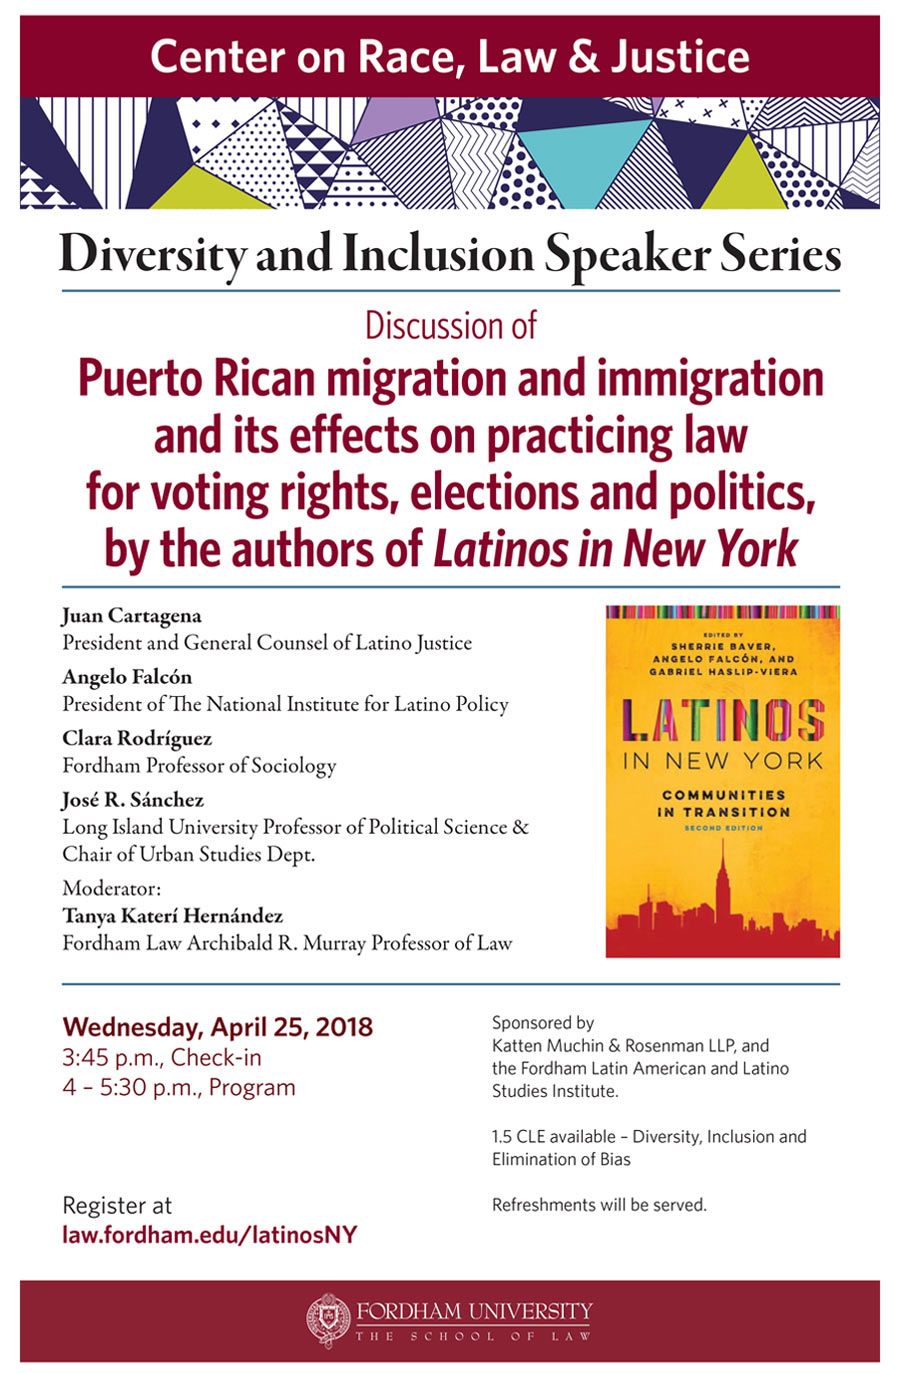 Diversity and Inclusion Speaker Series book cover